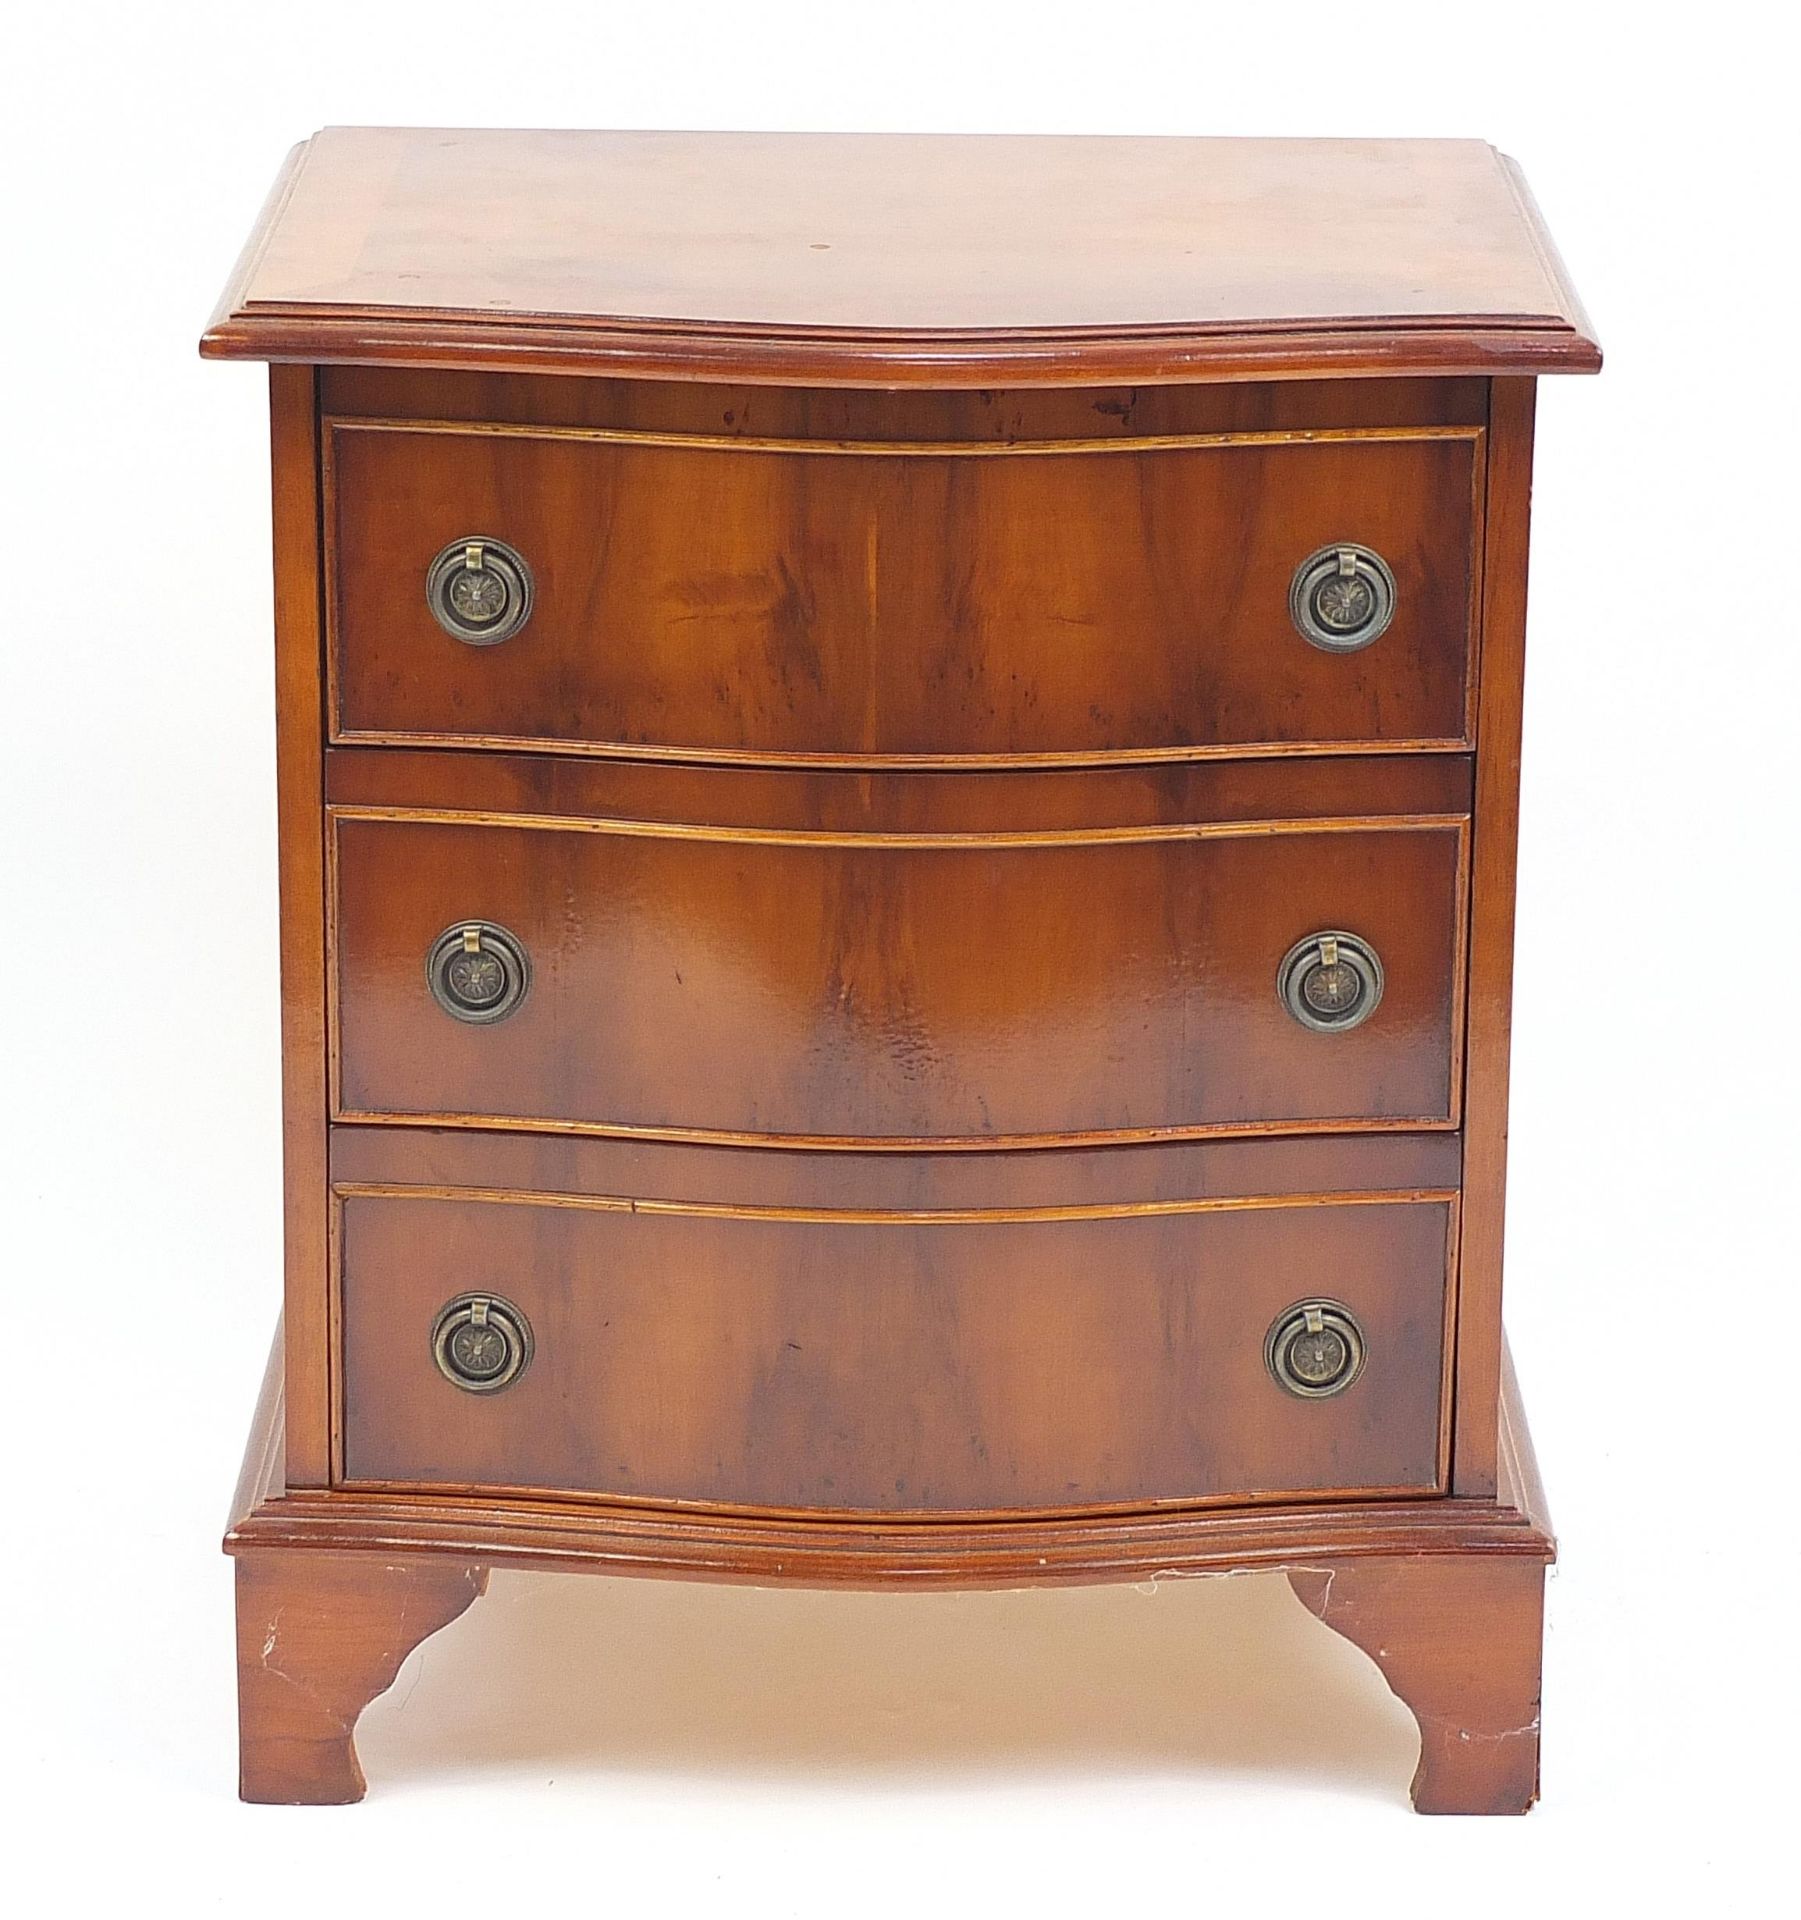 Cross banded yew wood three drawer chest with serpentine front, 57cm H x 50cm W x 39cm D - Image 2 of 4